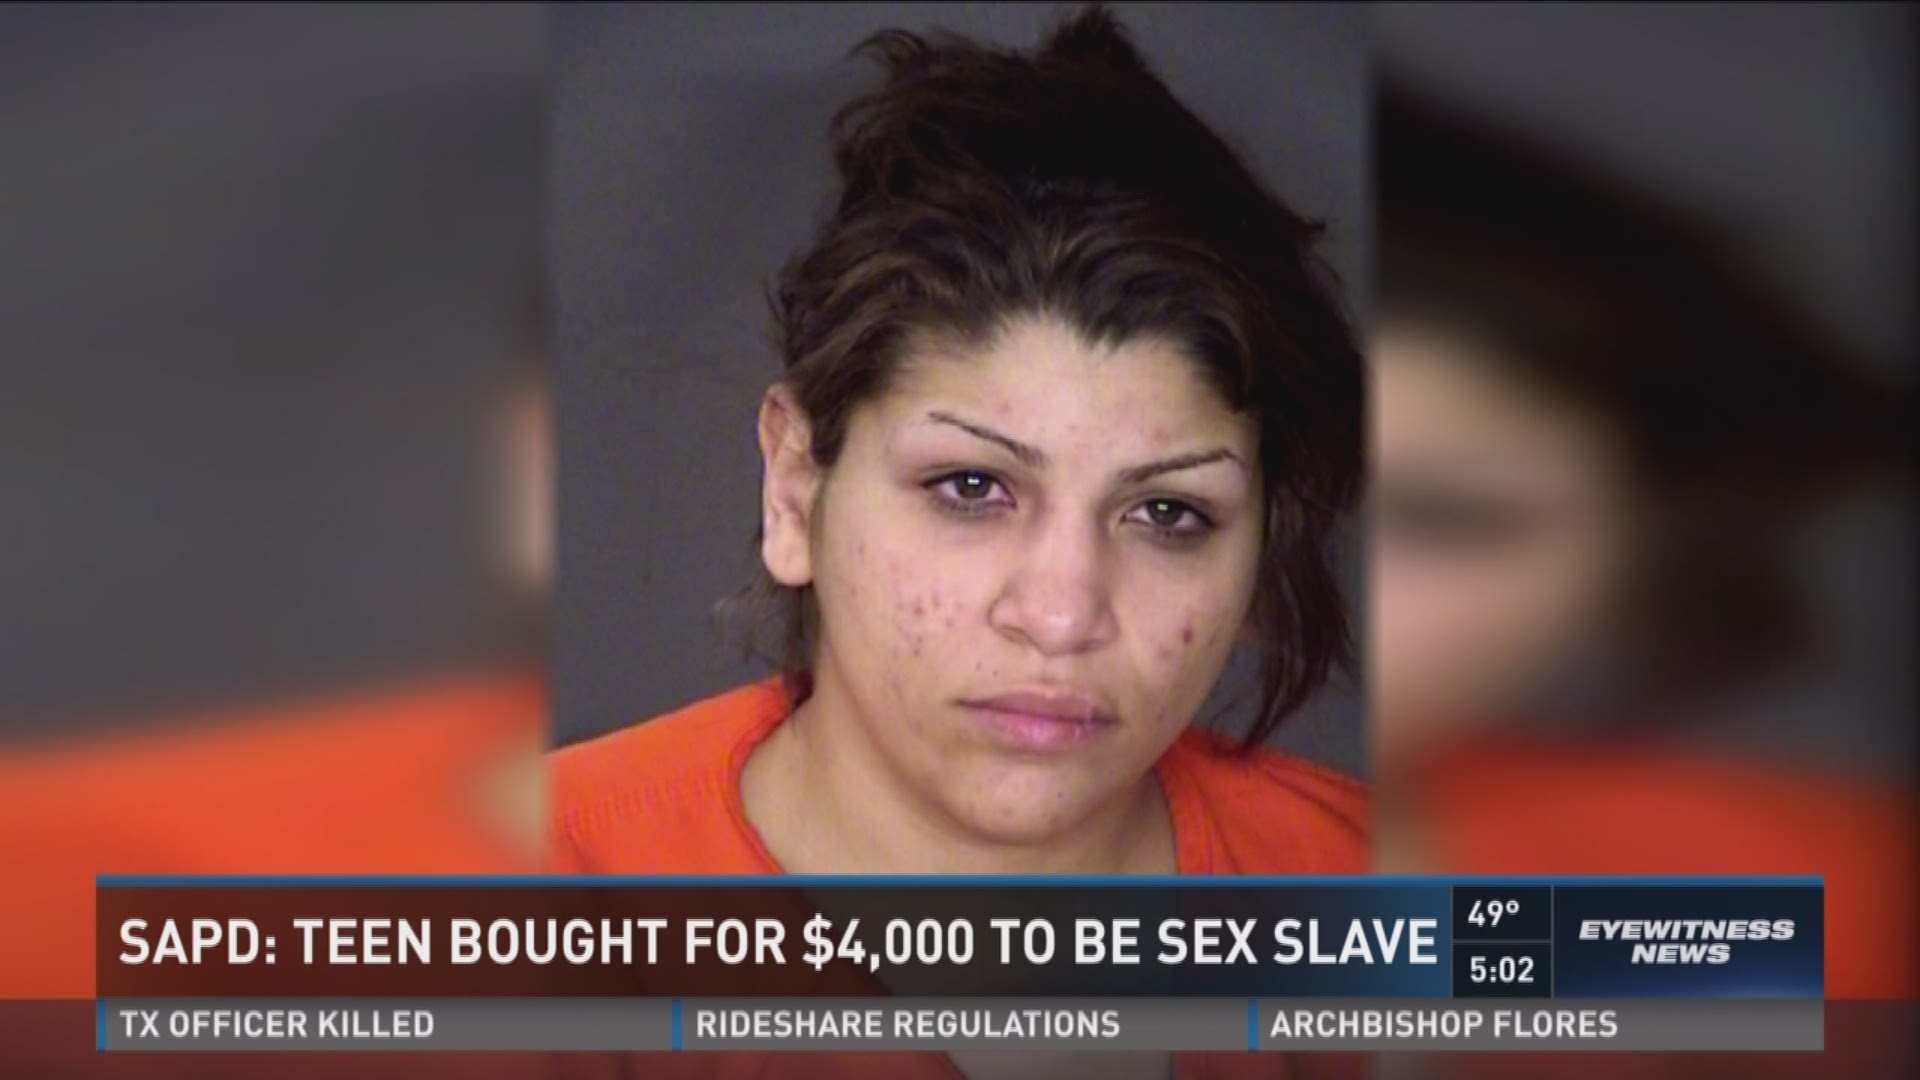 SAPD: Teen bought for $4,000 to be sex slave